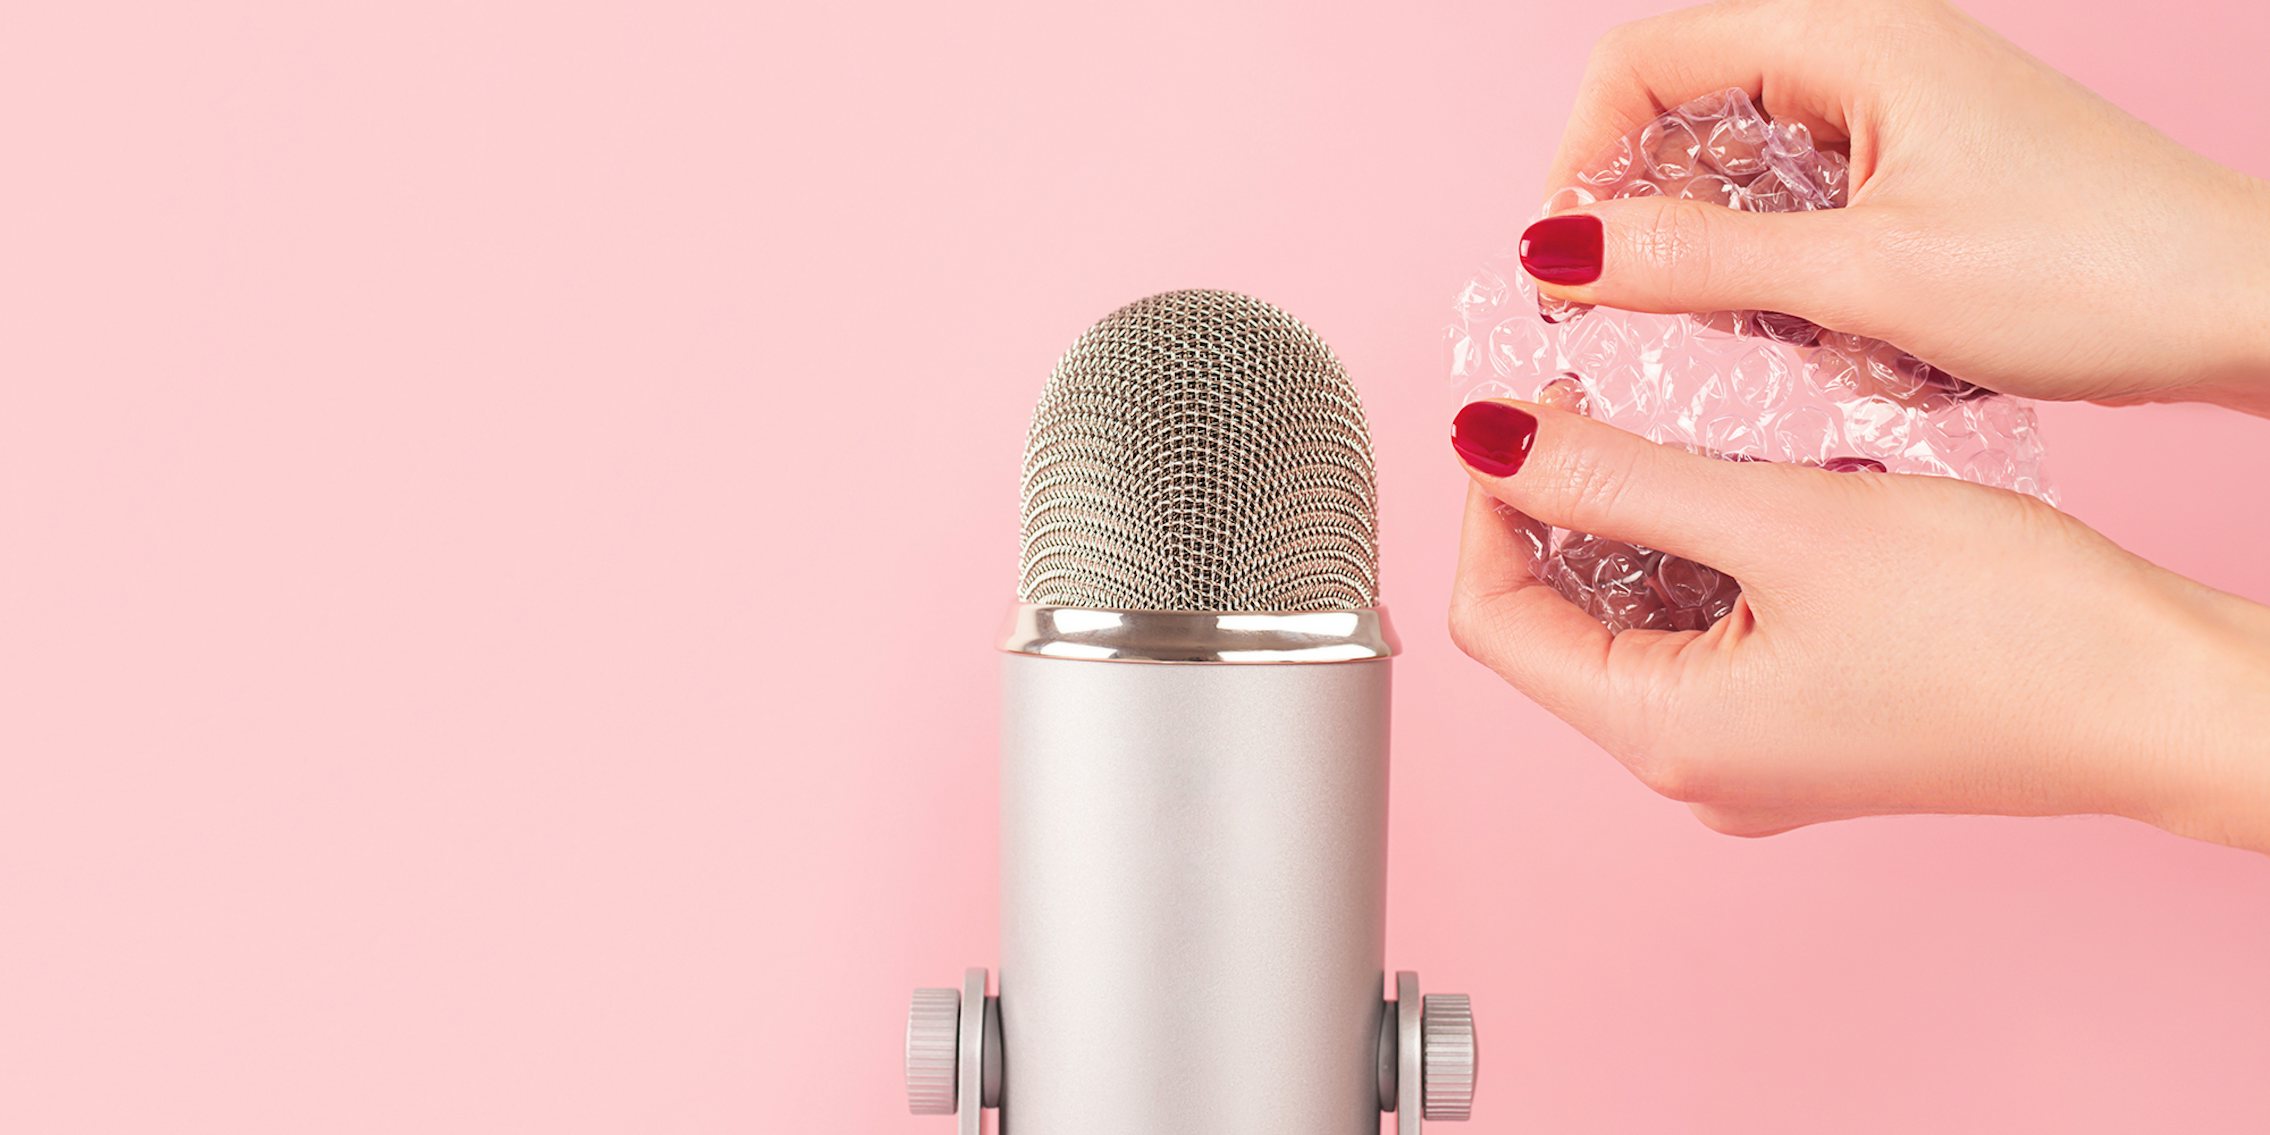 Woman hands with bubble wrap into a microphone, making ASMR sounds.